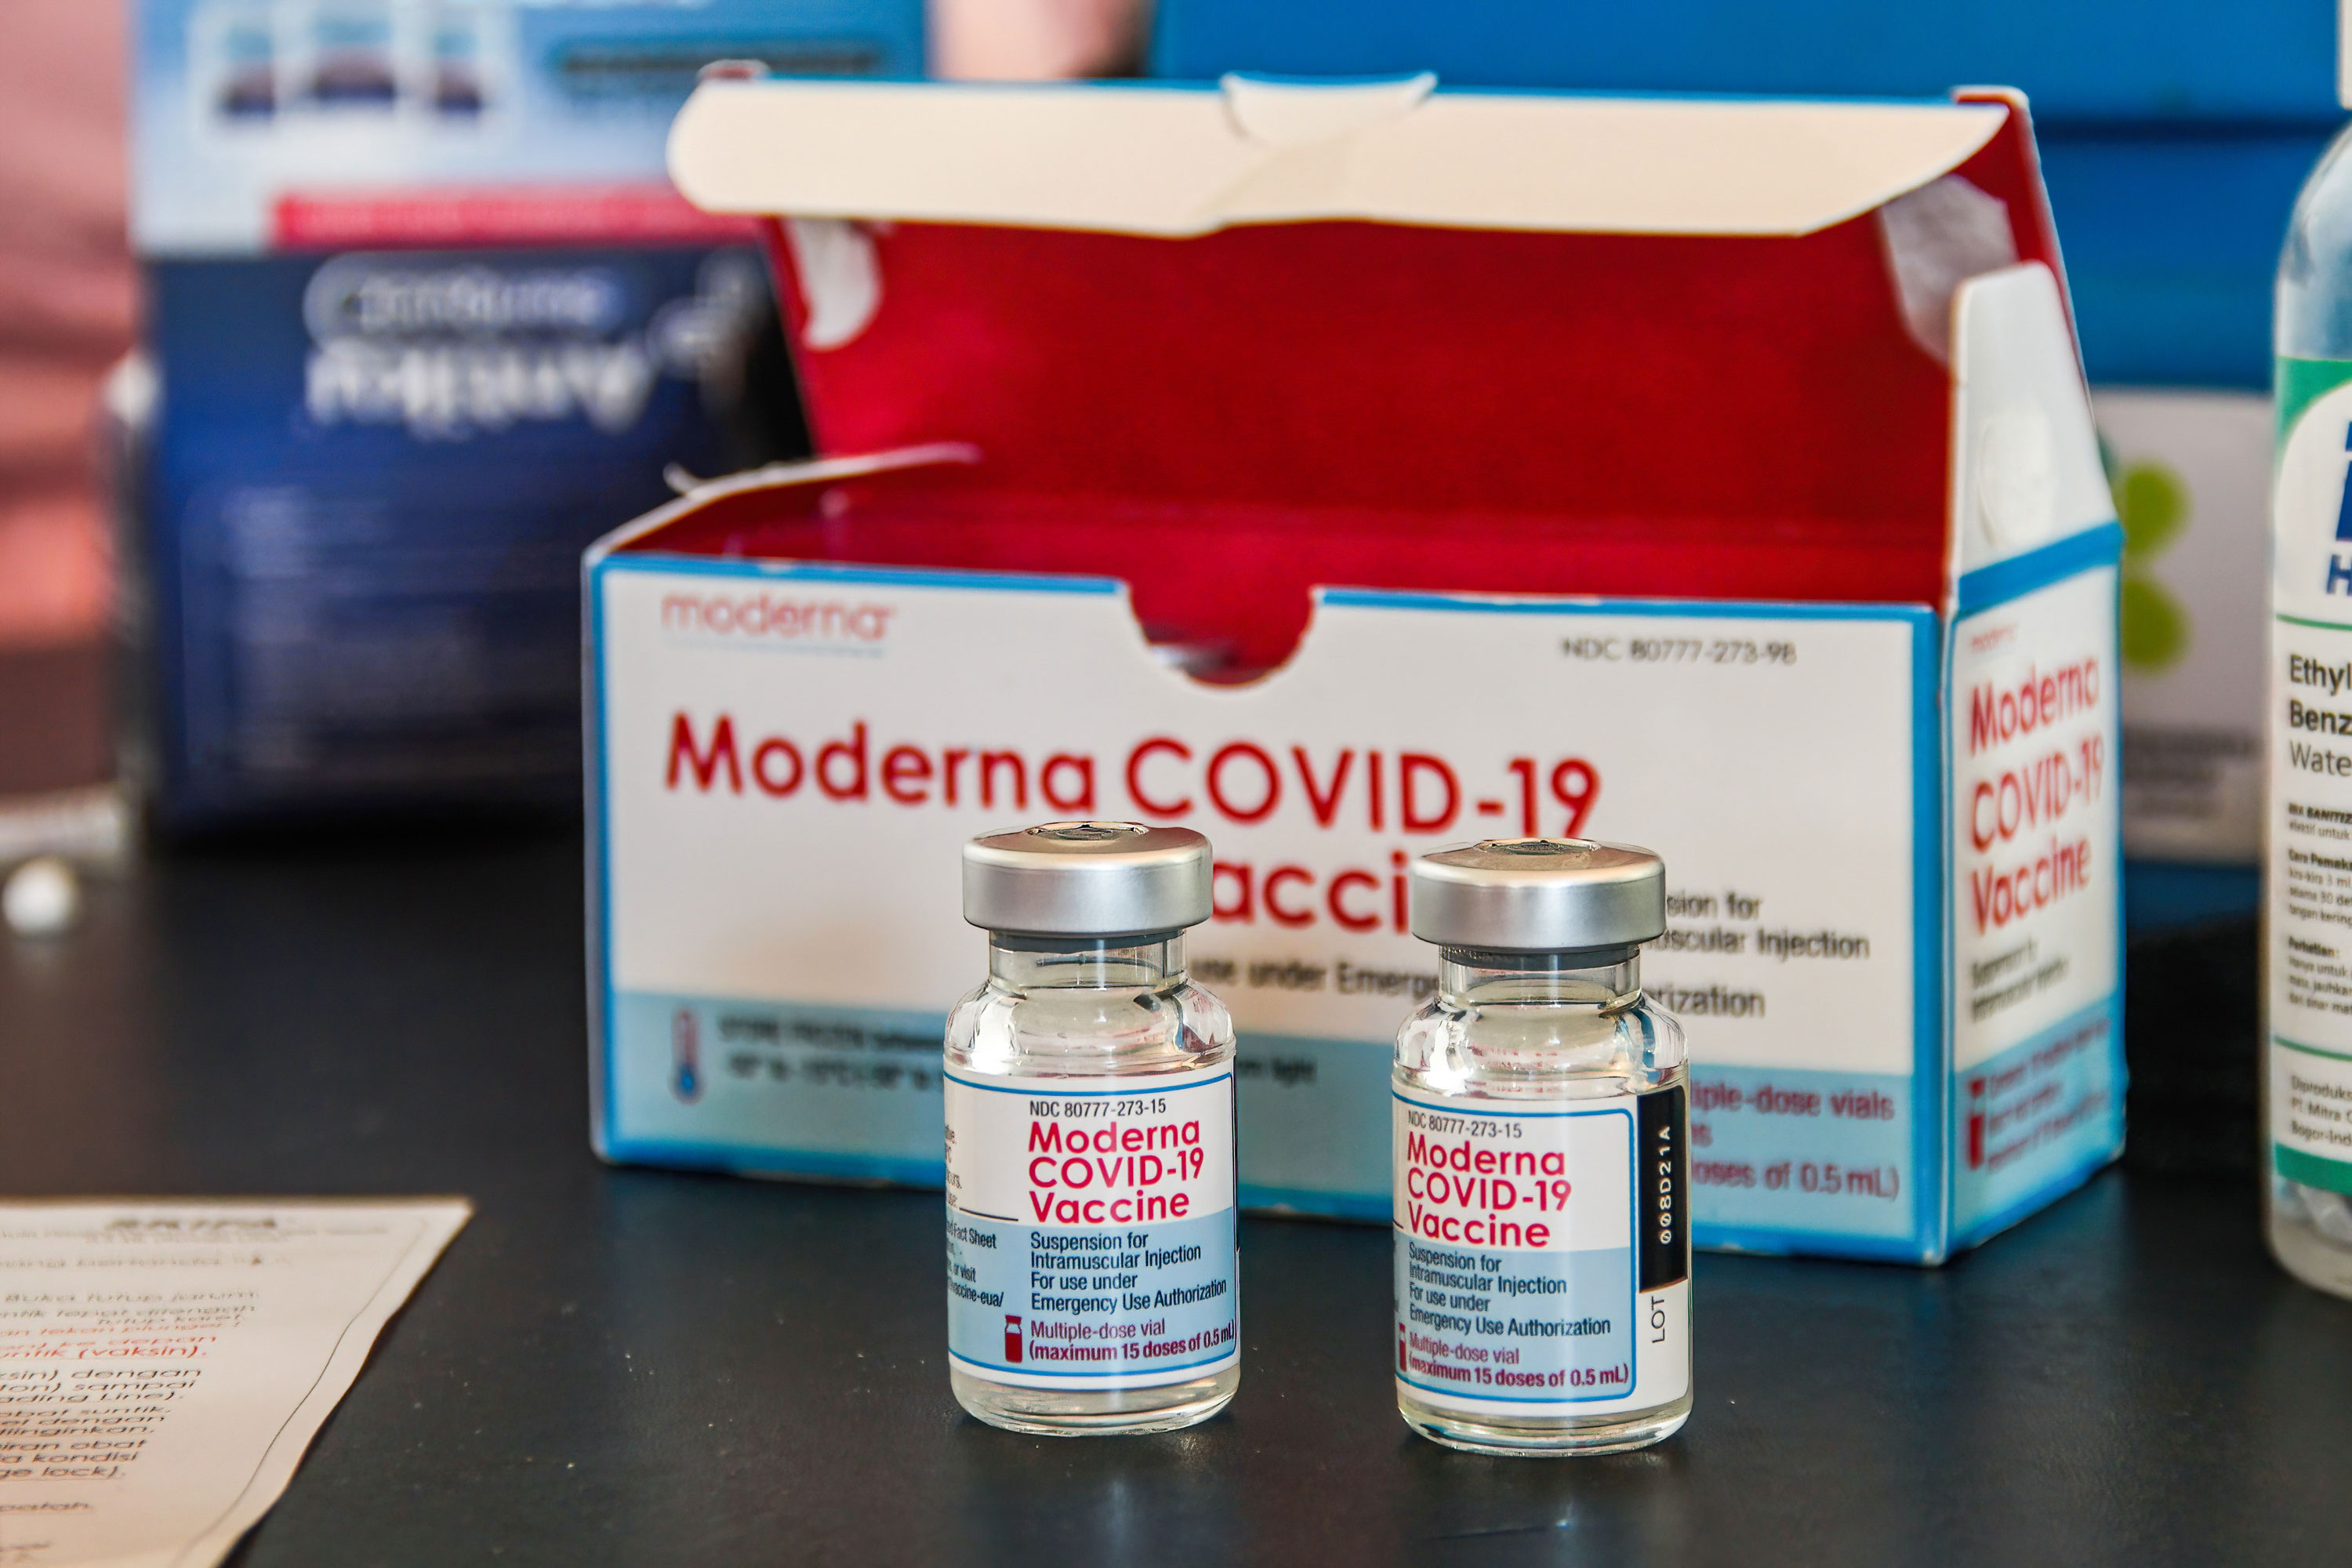 Moderna vaccine from which country